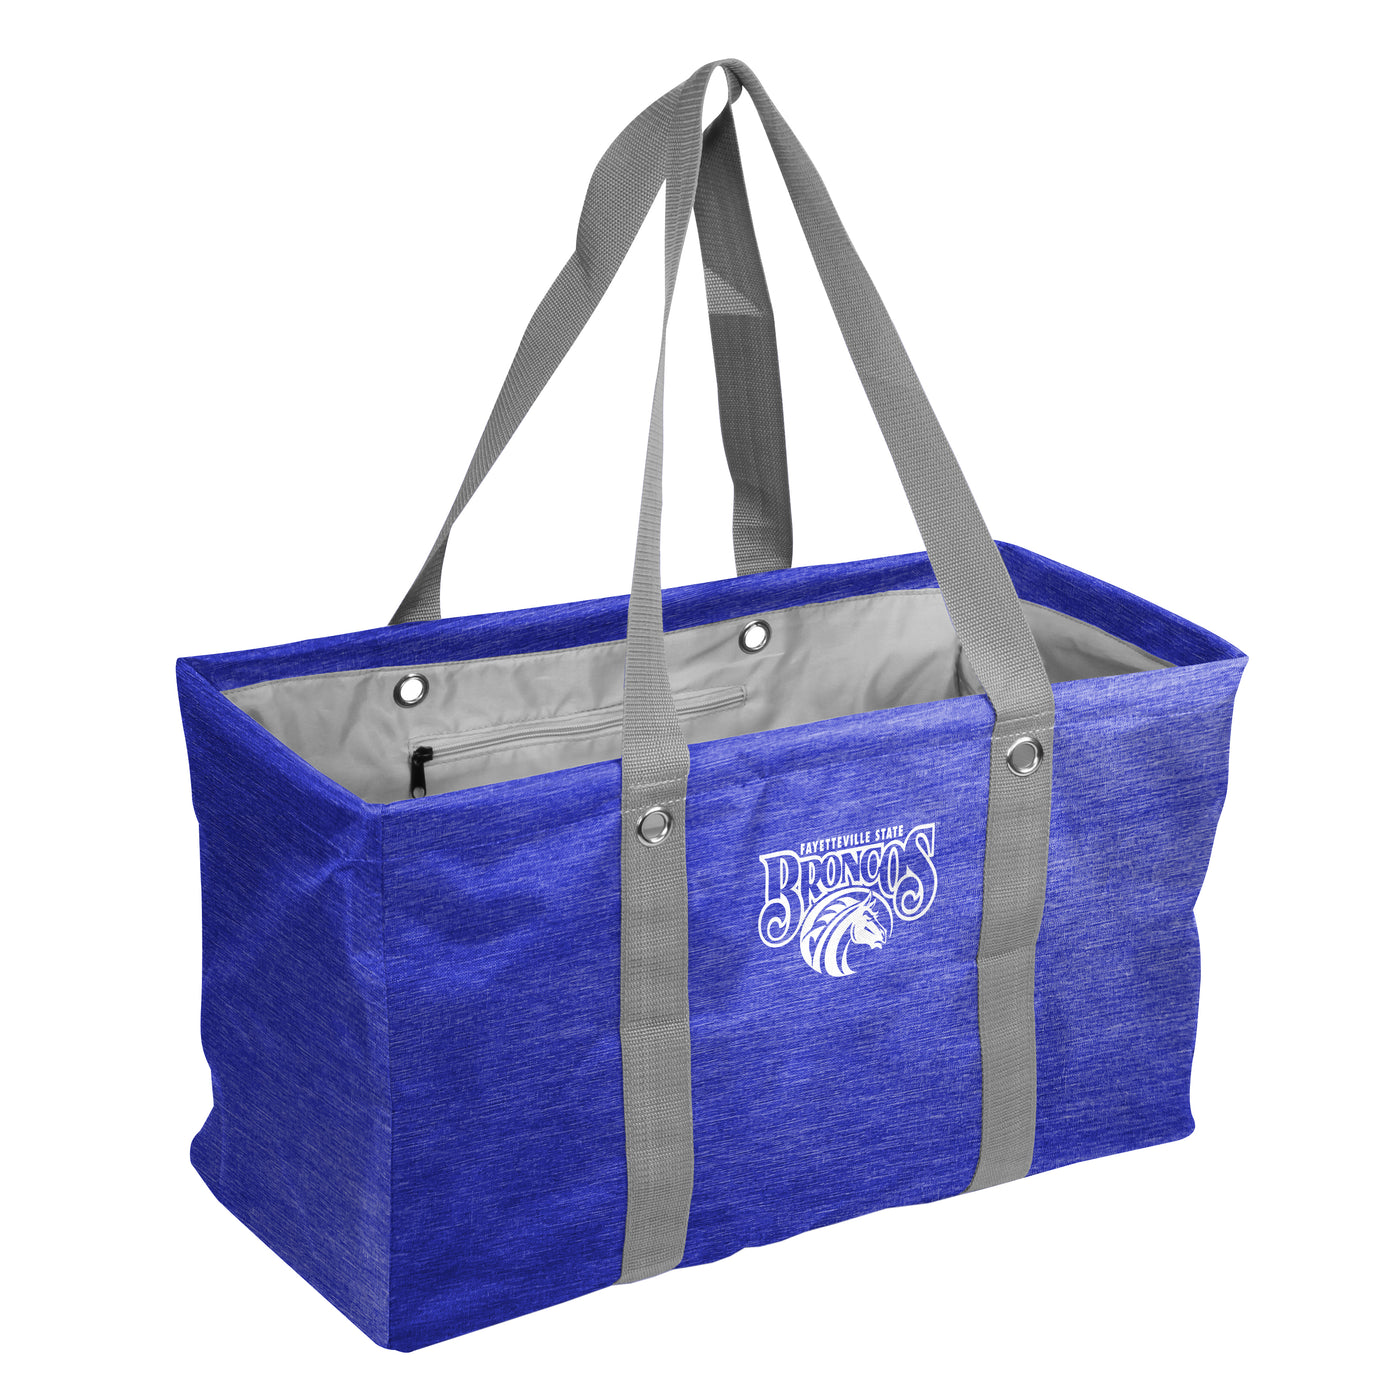 Fayetteville State Picnic Caddy